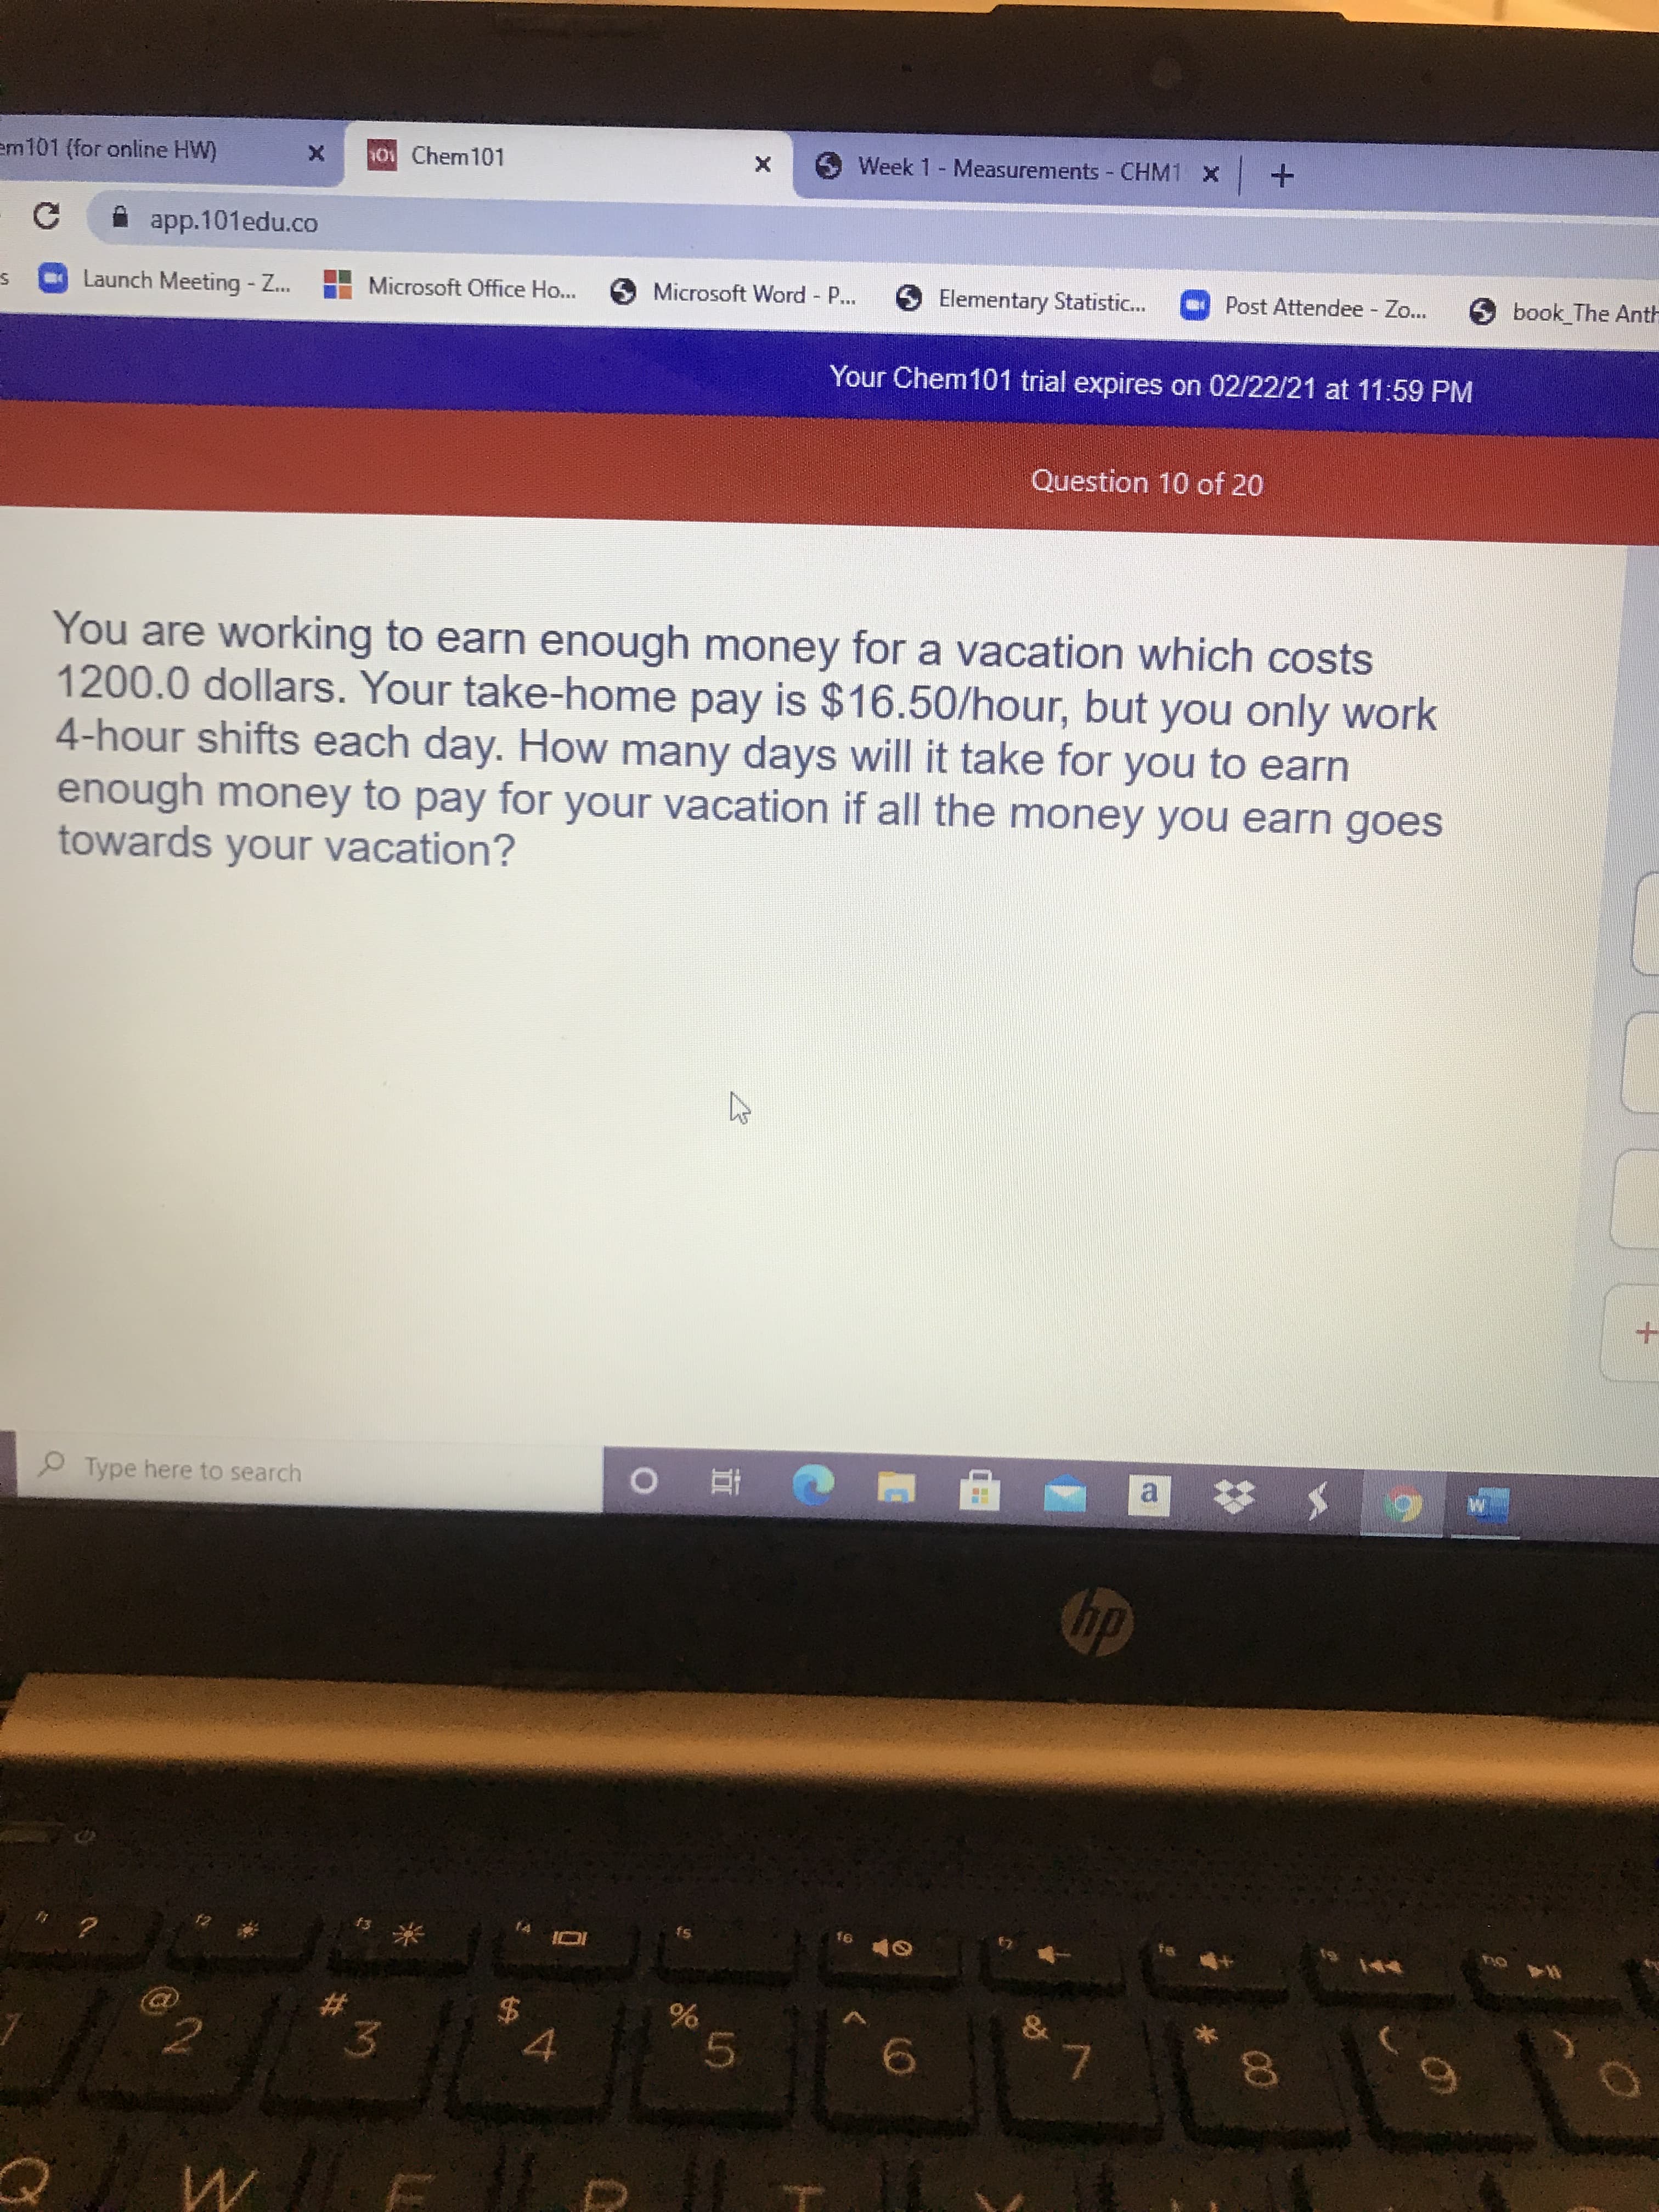 You are working to earn enough money for a vacation which costs
1200.0 dollars. Your take-home pay is $16.50/hour, but you only work
4-hour shifts each day. How many days will it take for you to earn
enough money to pay for your vacation if all the money you earn goes
towards your vacation?
